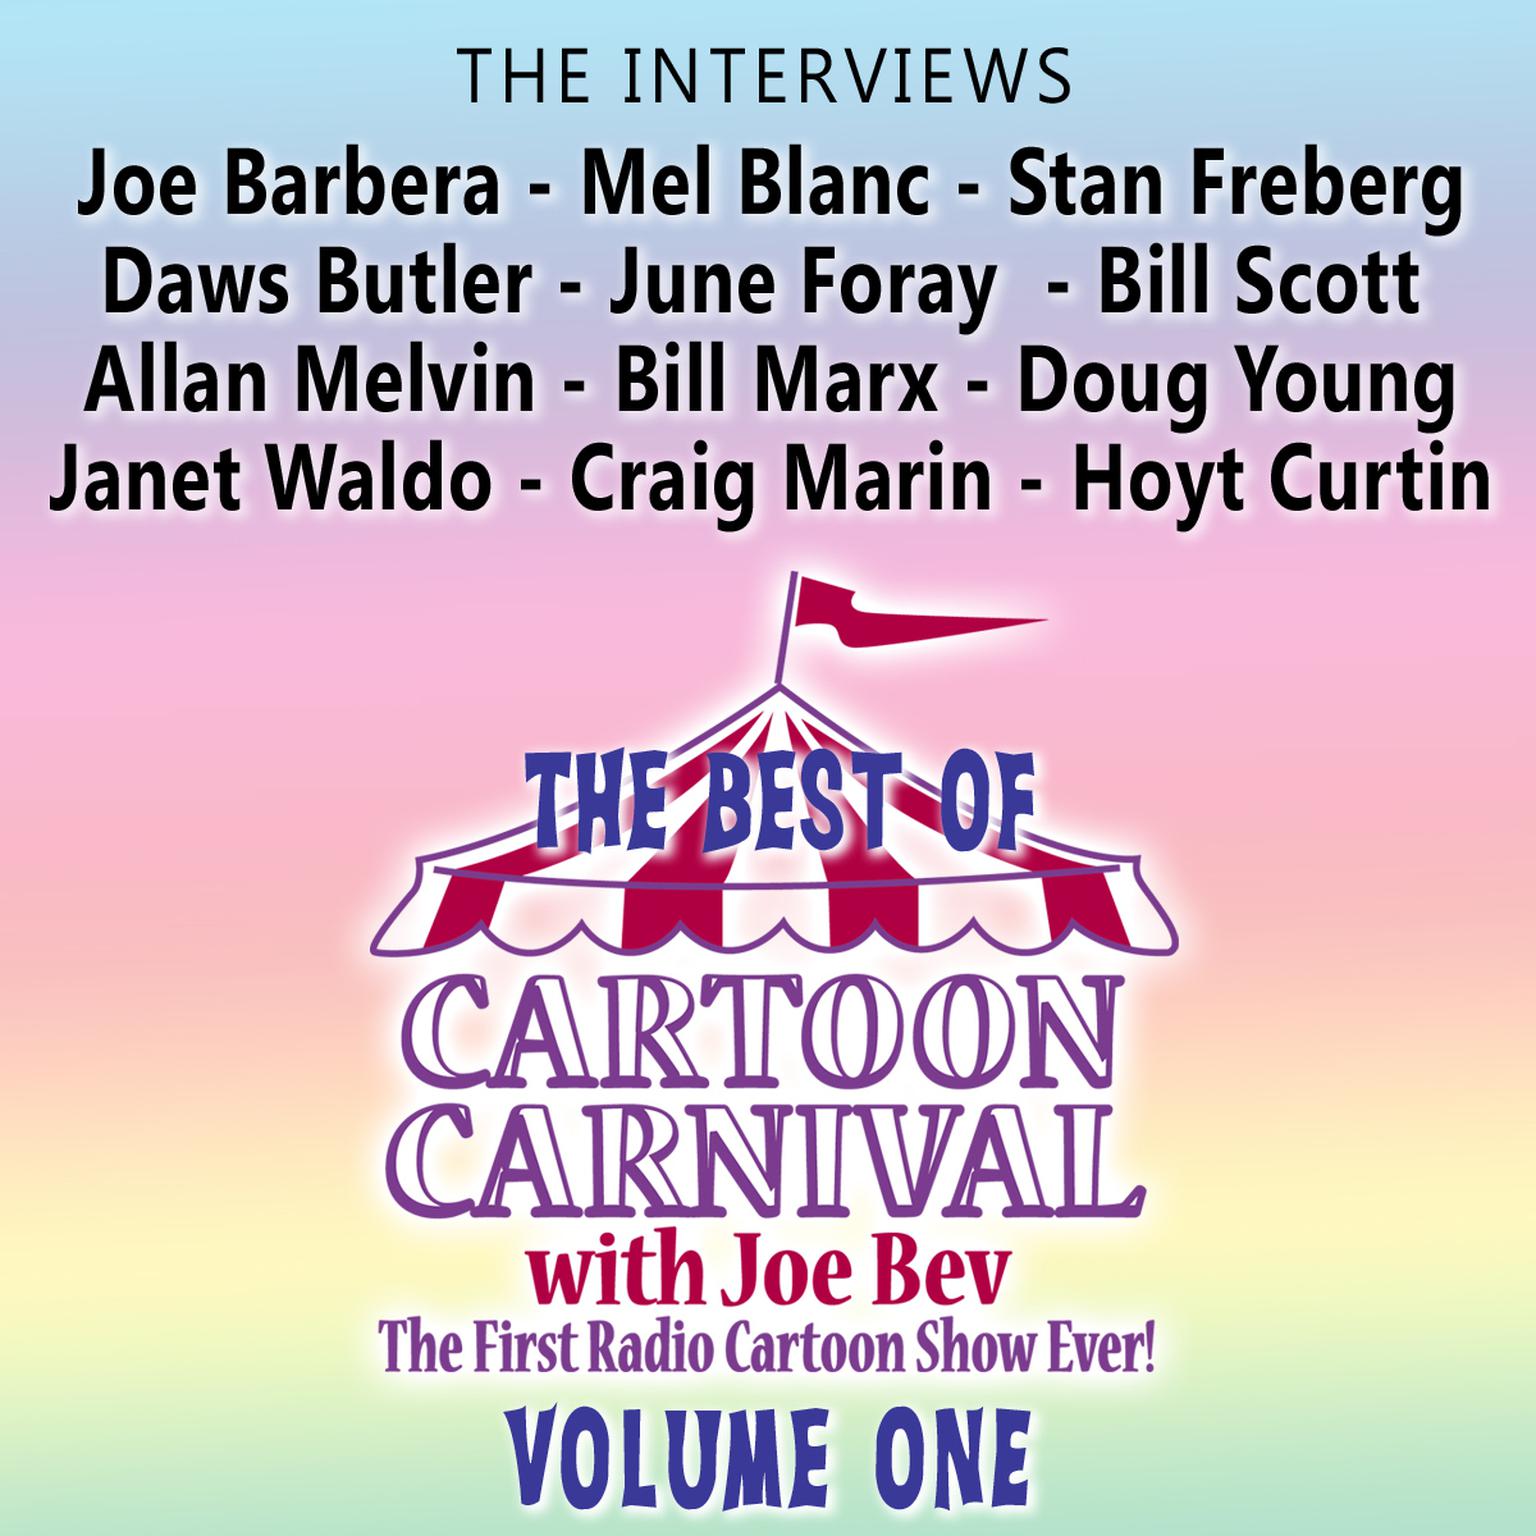 The Best of Cartoon Carnival, Vol. 1: The Interviews Audiobook, by Waterlogg Productions